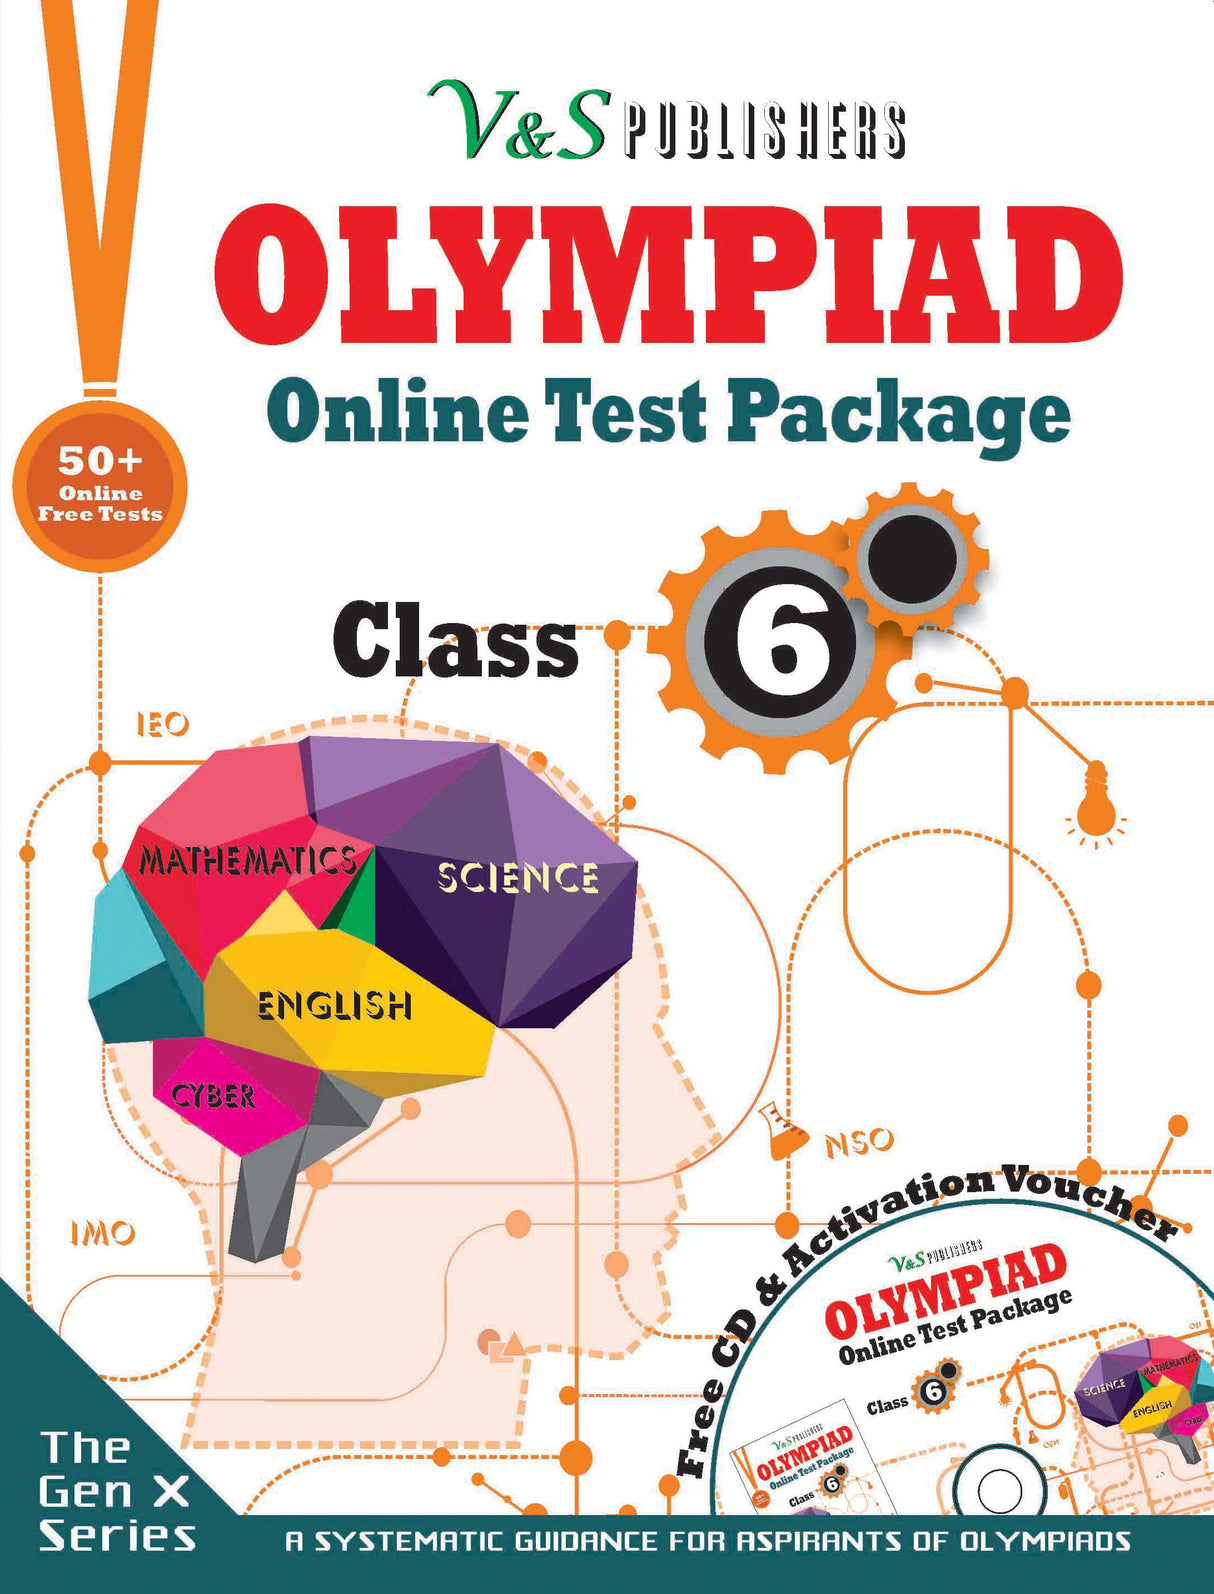 Olympiad Online Test Package Class 6 (Free CD With Activation Voucher): 50 Model Tests, Instant results, 24x7 Online support, Performance analysis